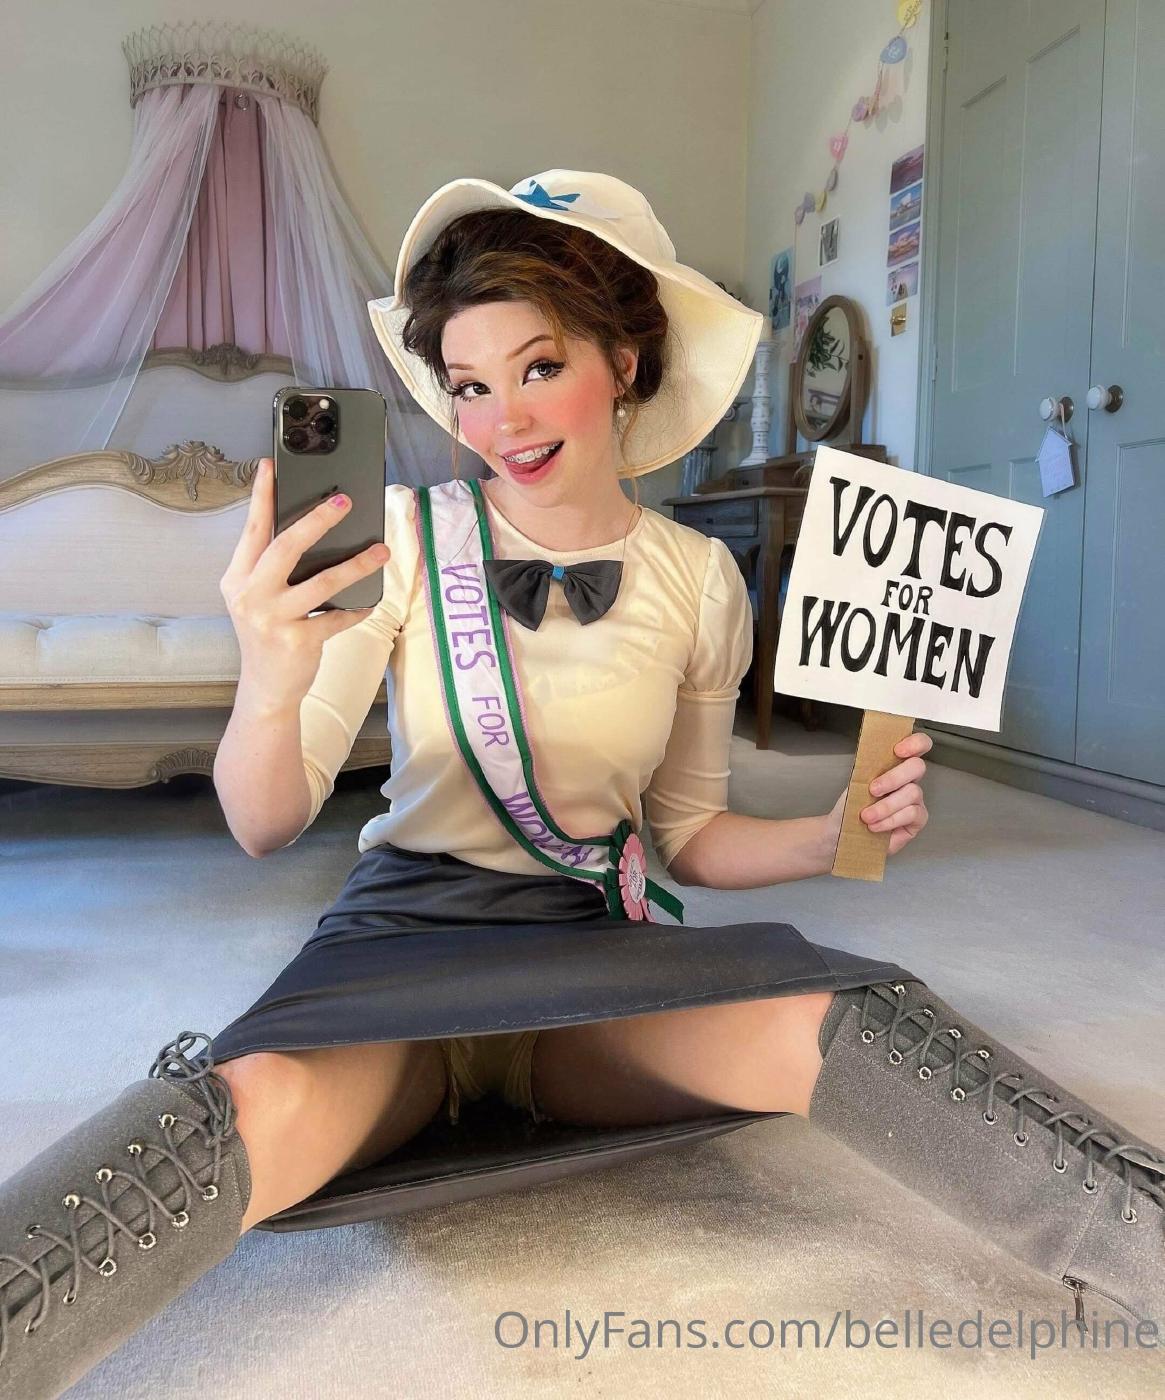 Belle Delphine Votes For Women Onlyfans Set Leaked Zmrqaw